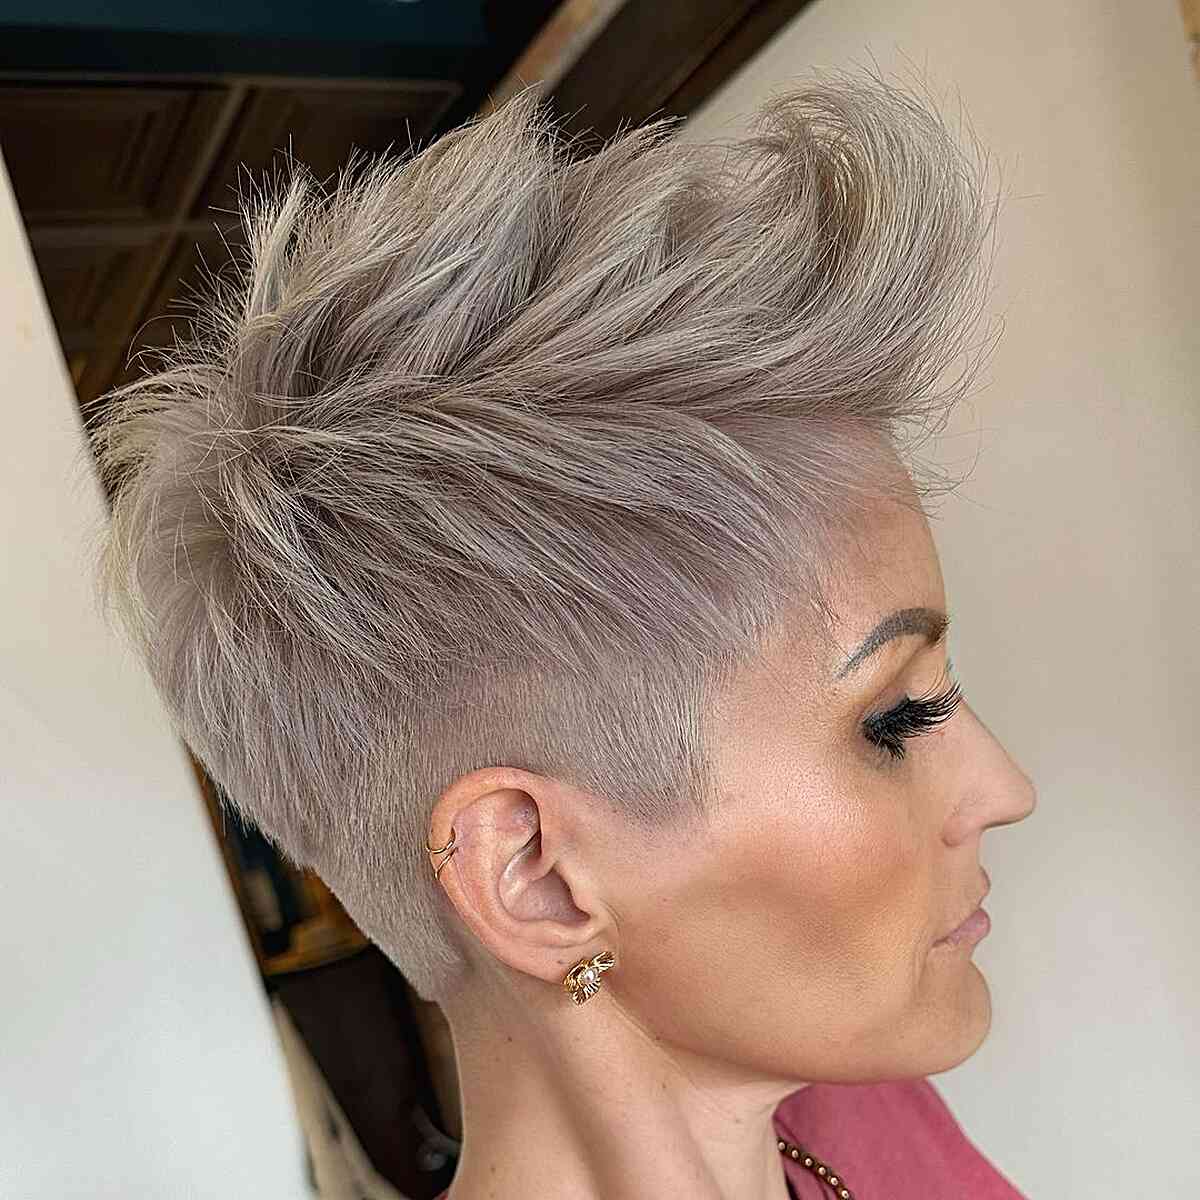 Spiky Pixie with an Icy Hue